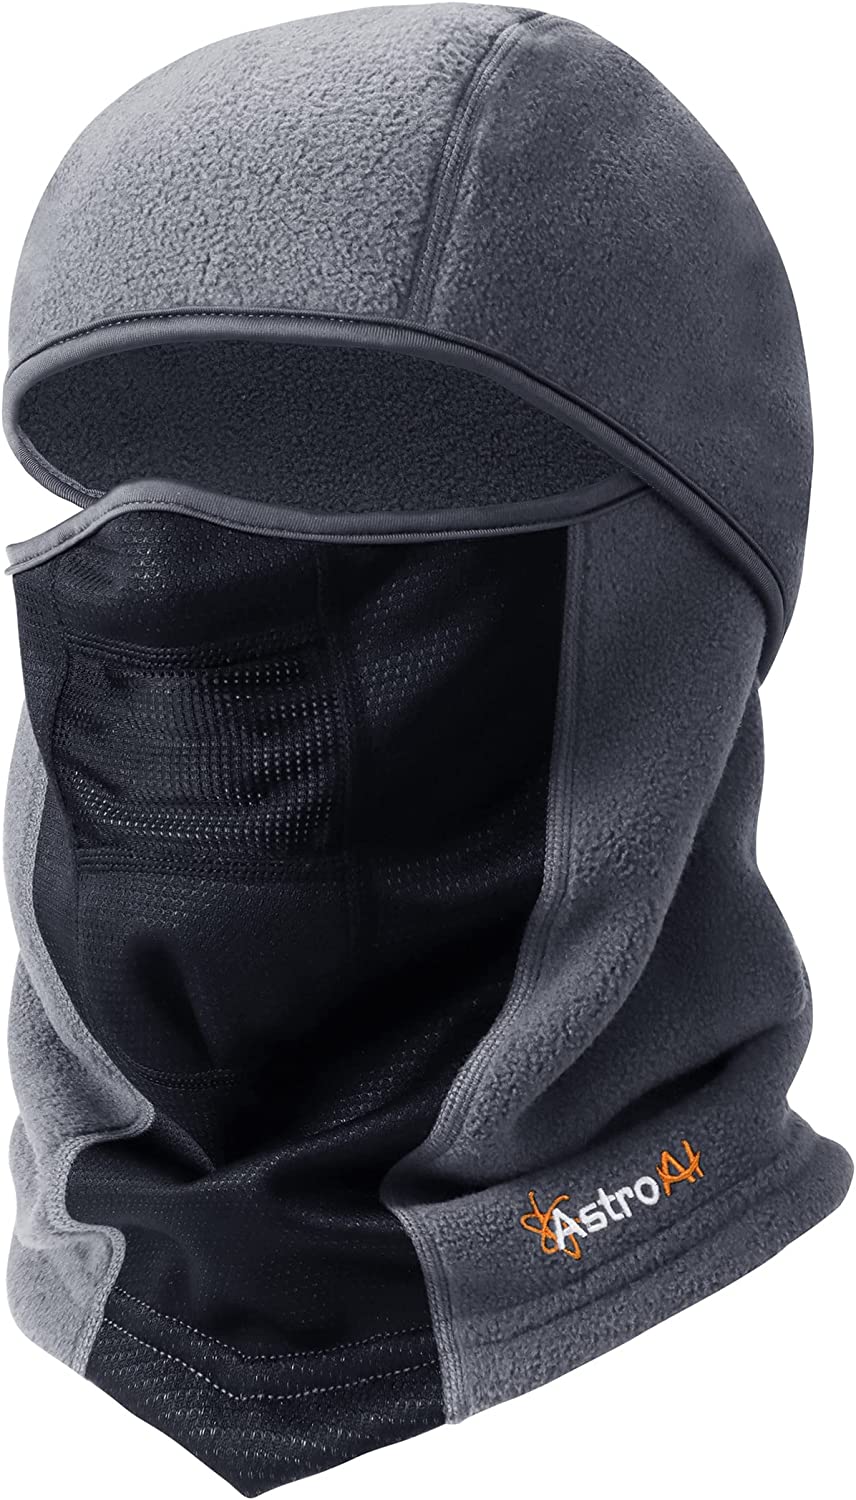 AstroAI Balaclava Ski Mask Winter Fleece Thermal Face Mask Cover for Men Women Warmer Windproof Breathable, Cold Weather Gear for Skiing, Outdoor Gear, Riding Motorcycle & Snowboarding, Gray